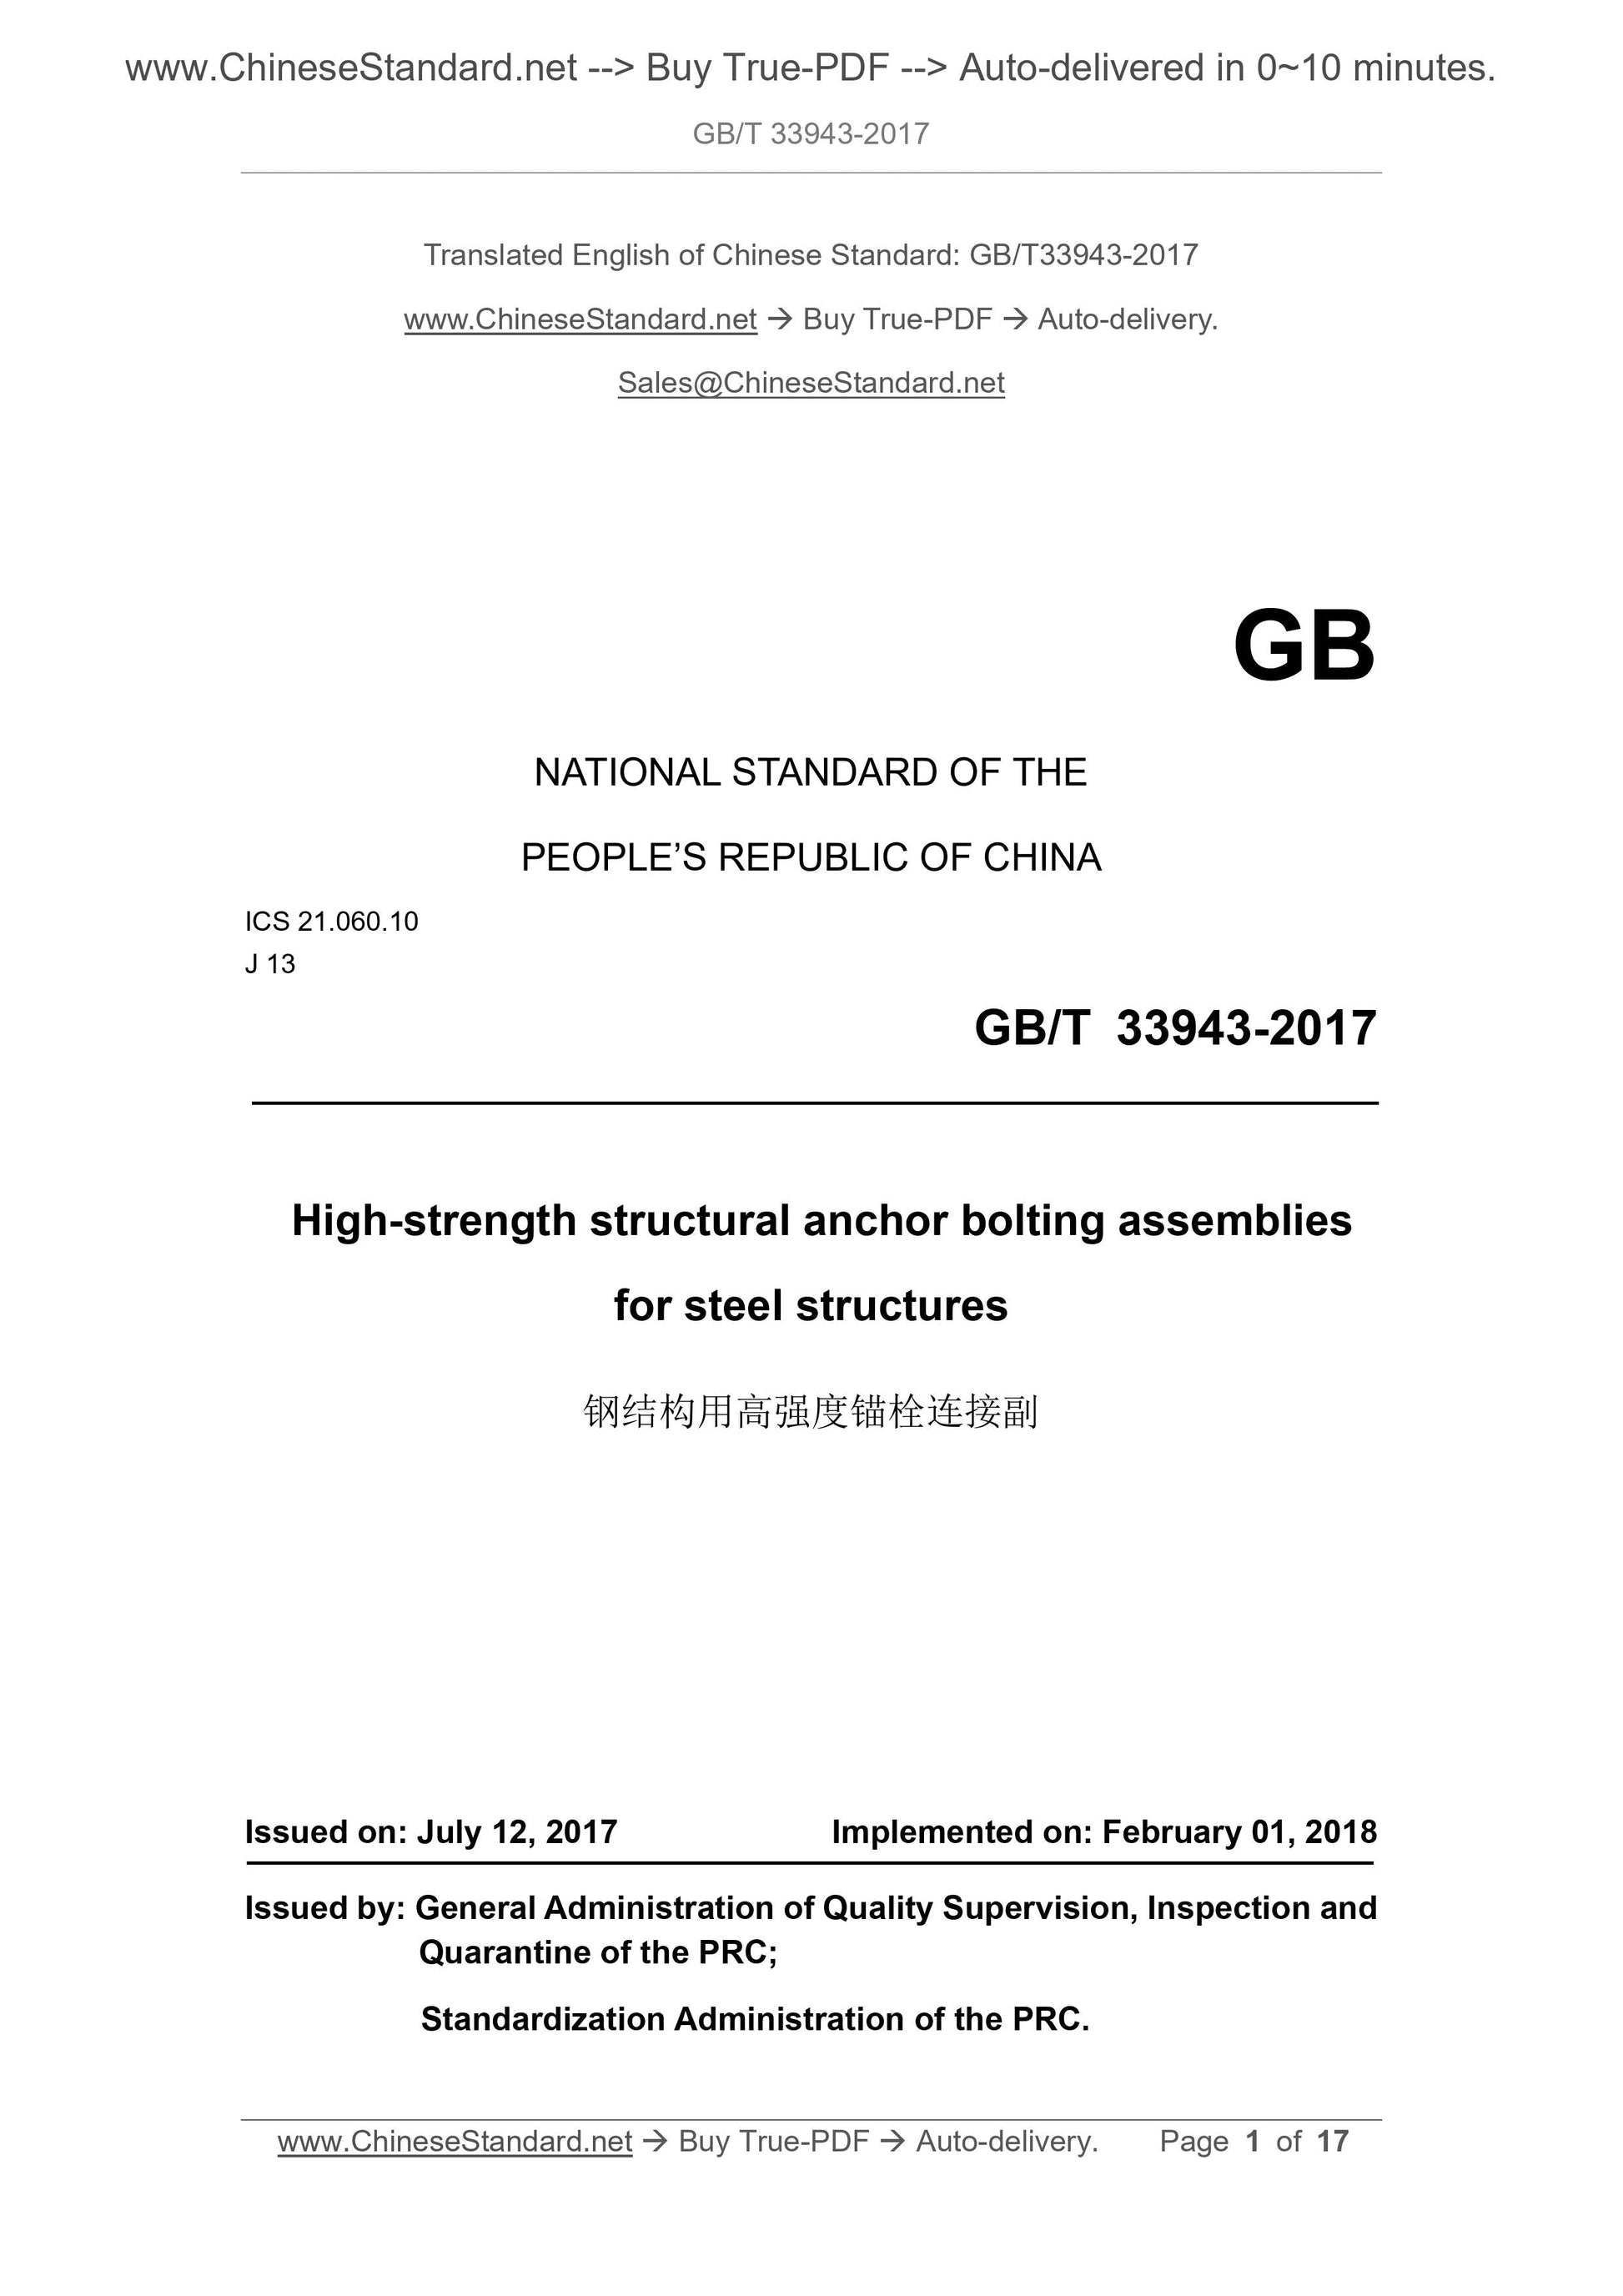 GB/T 33943-2017 Page 1